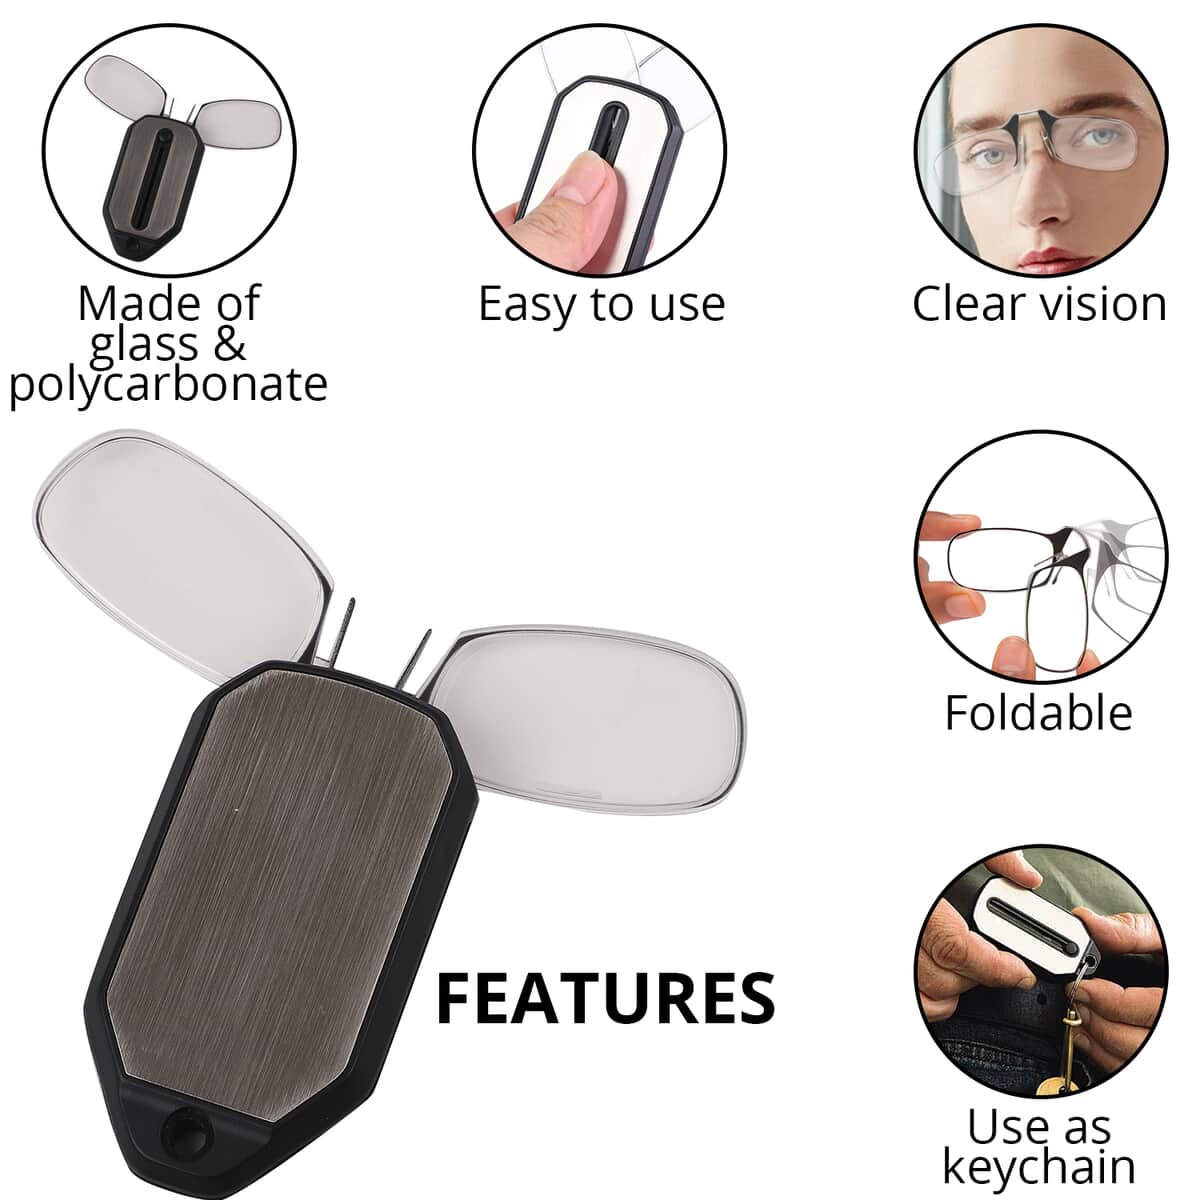 Black 125 Degree Foldable Reading Glasses with Case image number 2